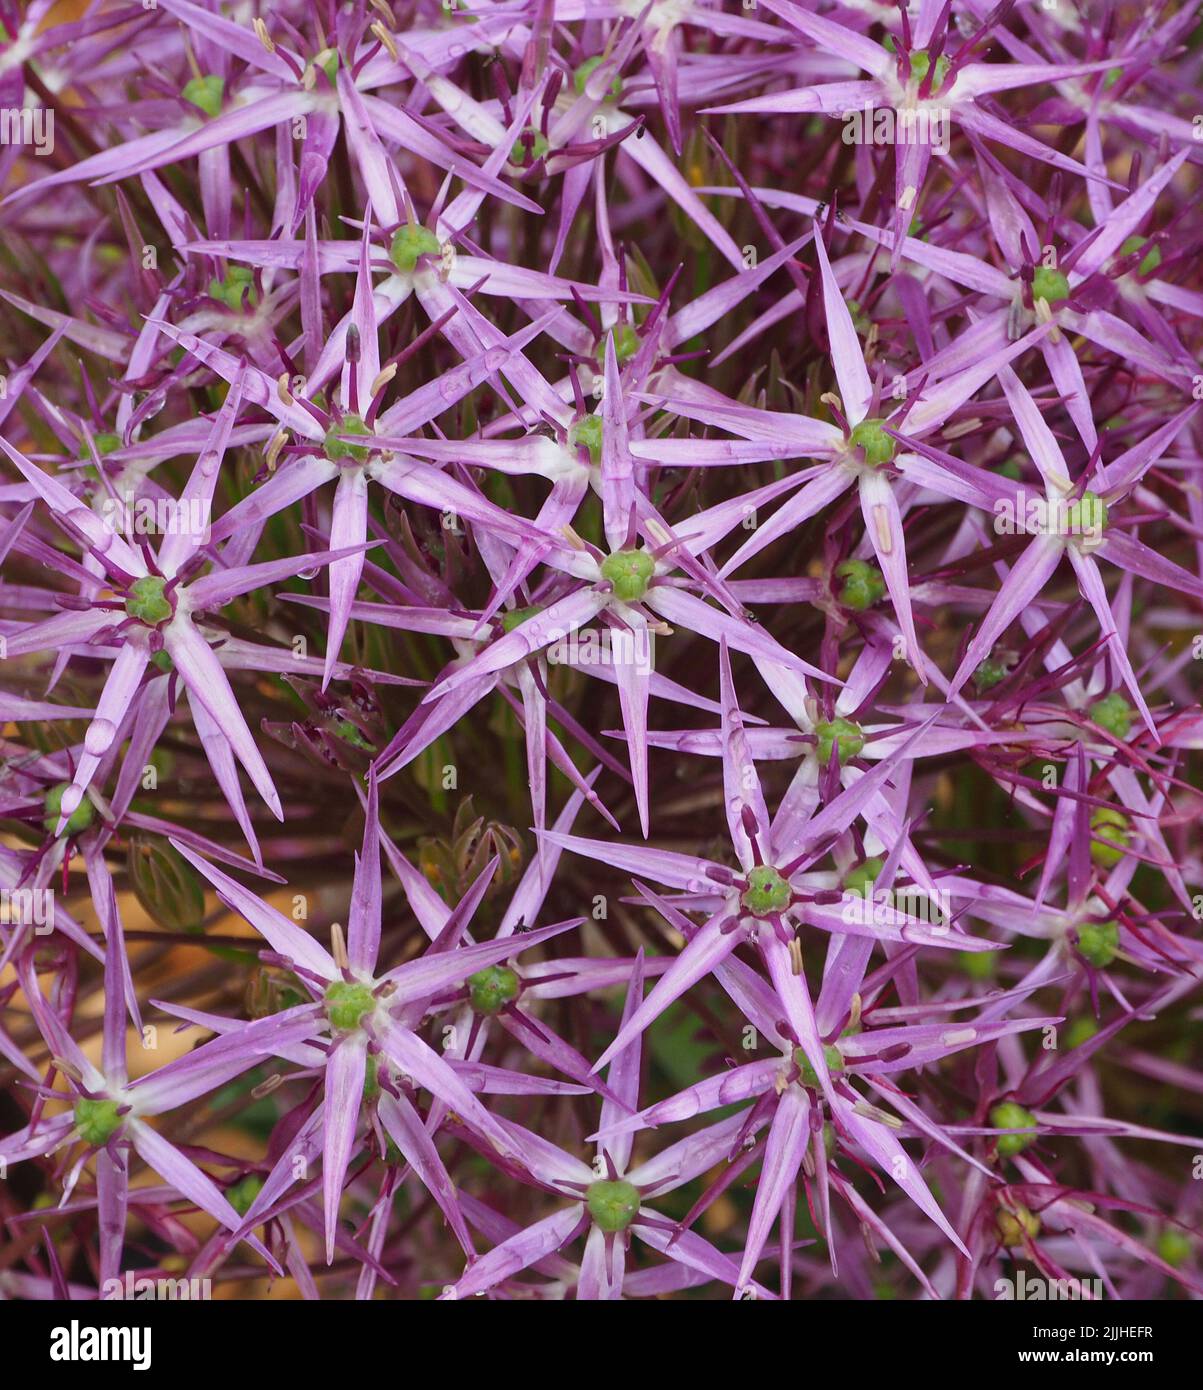 Close up macro shot of a single inflorescence of purple Allium Christophii showing the various flowerlets Stock Photo